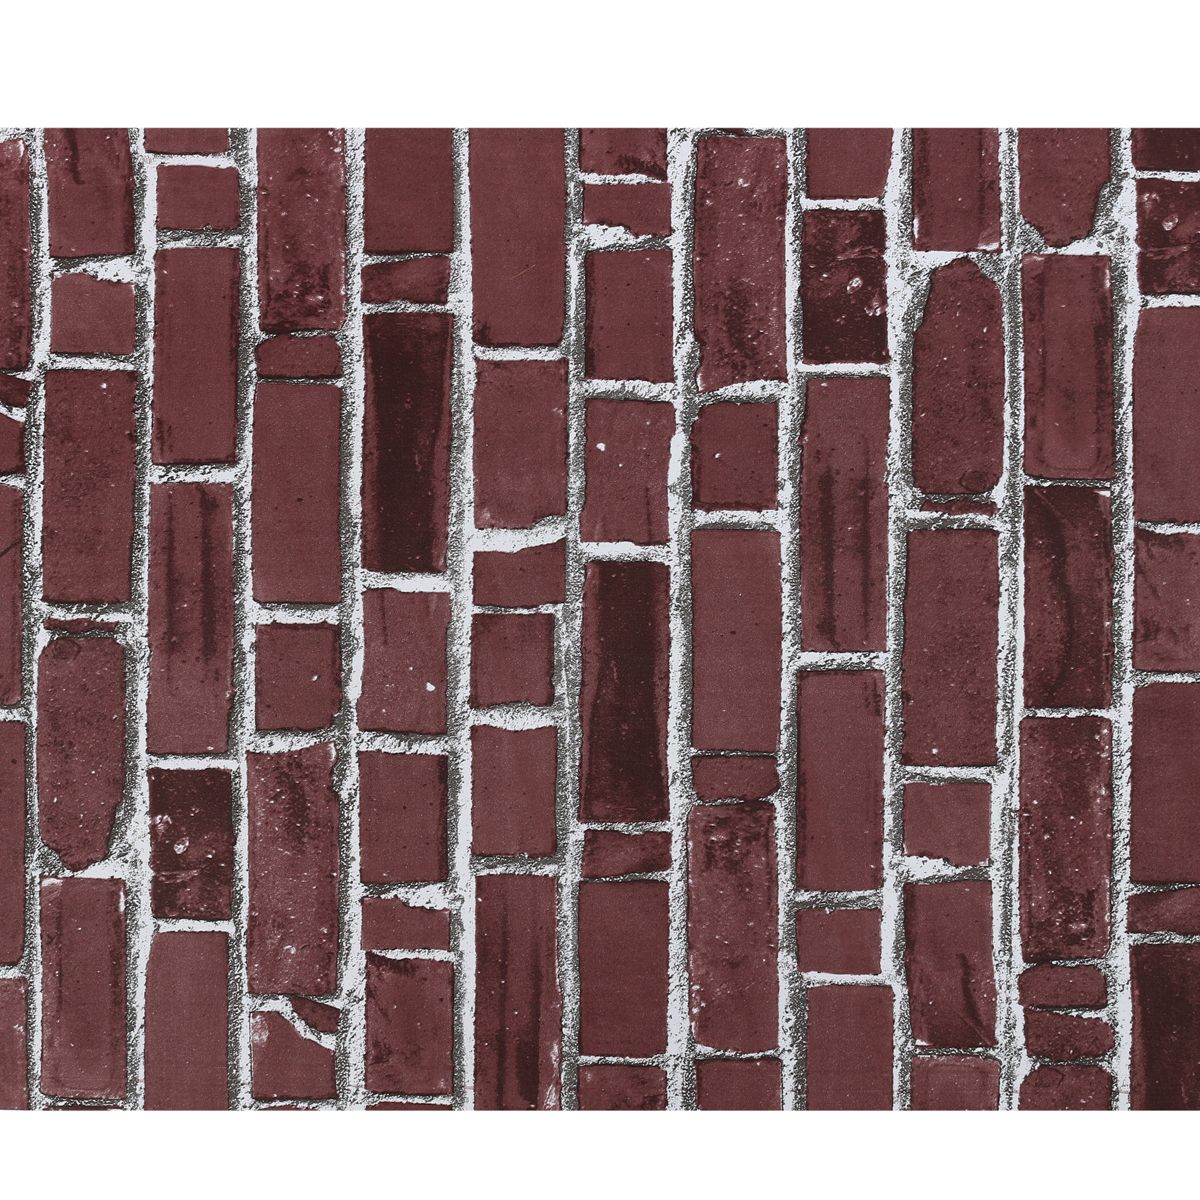 10M-Wall-Paper-Brick-Stone-Rustic-Effect-Self-adhesive-Wall-Stickers-Home-Decor-1464017